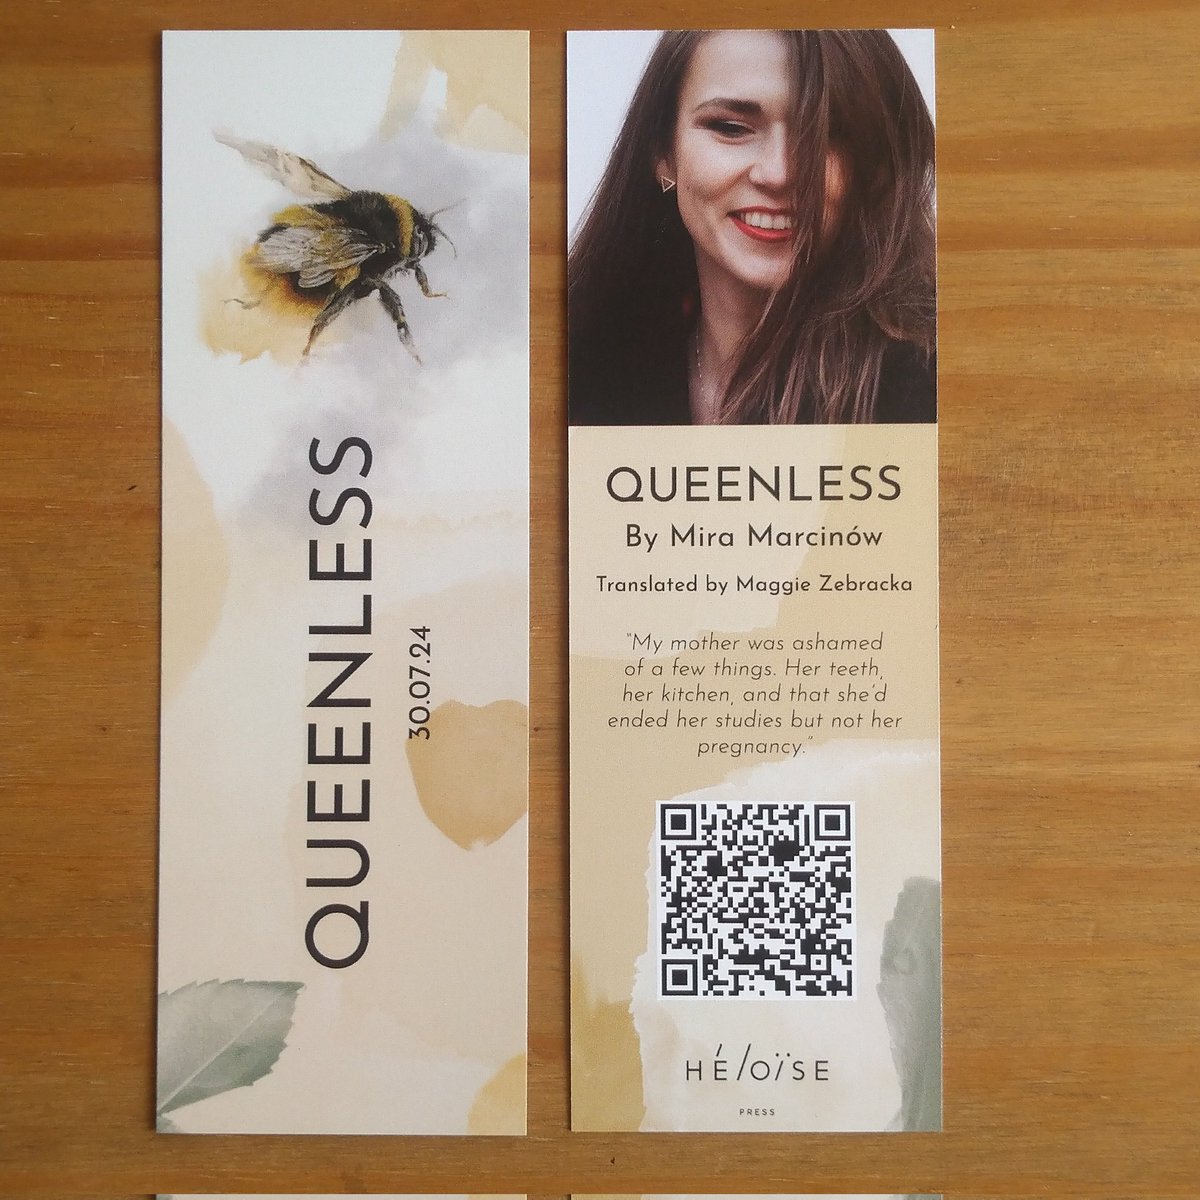 📢Mira Marcinow will be at Islington Central Library on 16.03 to talk about her journey as a debut author📢 Queenless is launching in the summer but you can get this beautiful bookmark at the alternativebookfairlondon.co.uk @IndieNovella @rosalucy8 @IndiePressNet @Read_WIT